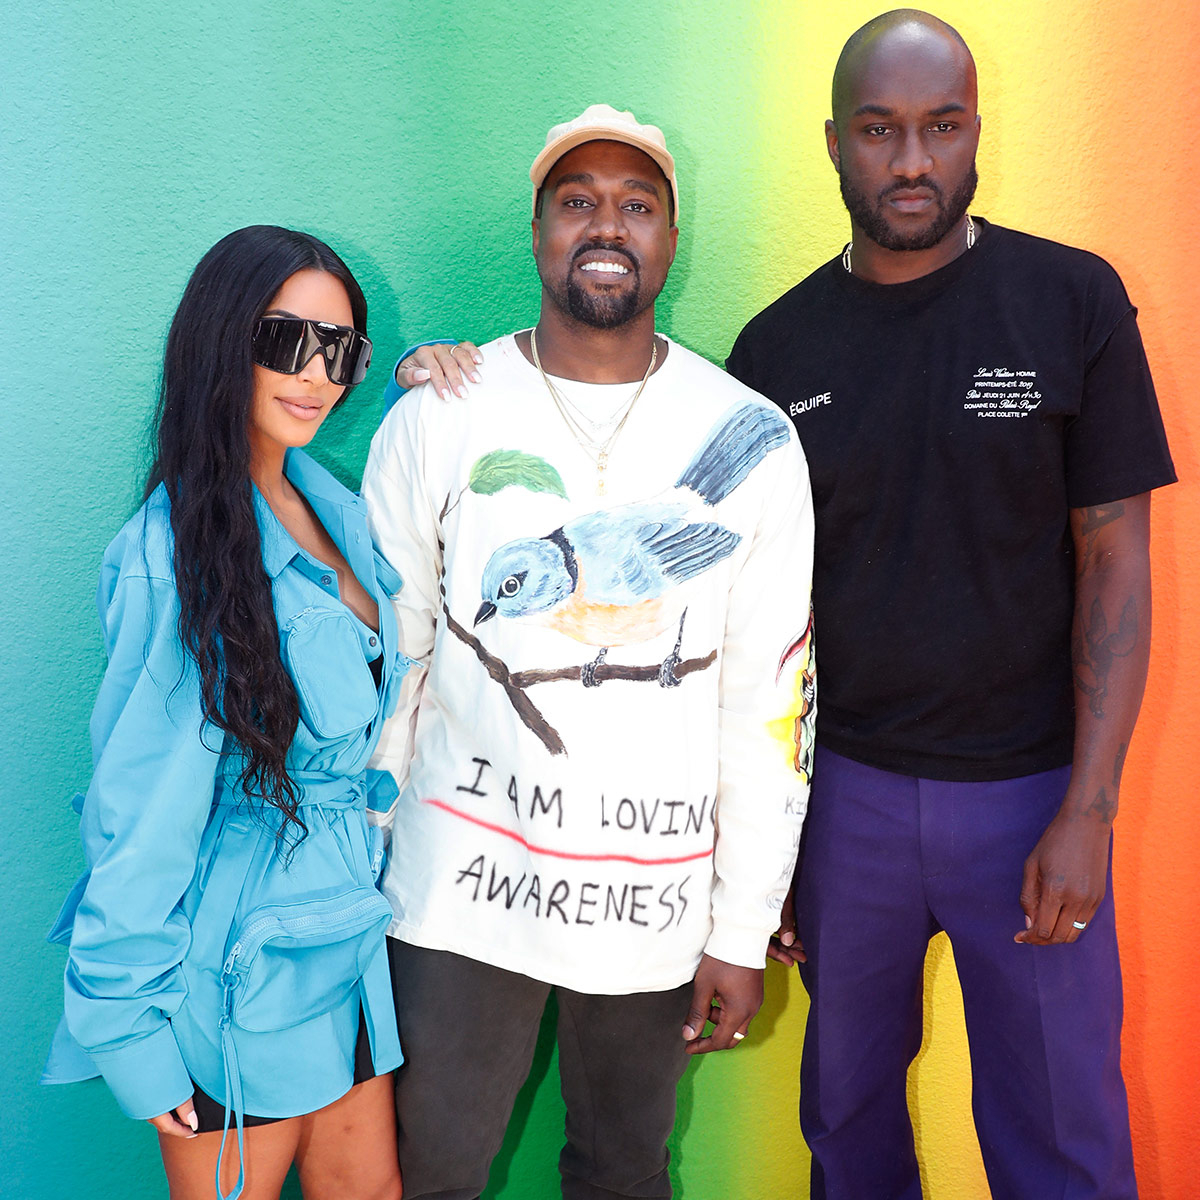 Kanye West Got His Wish, Reunited With Kim Kardashian Briefly for Virgil  Abloh